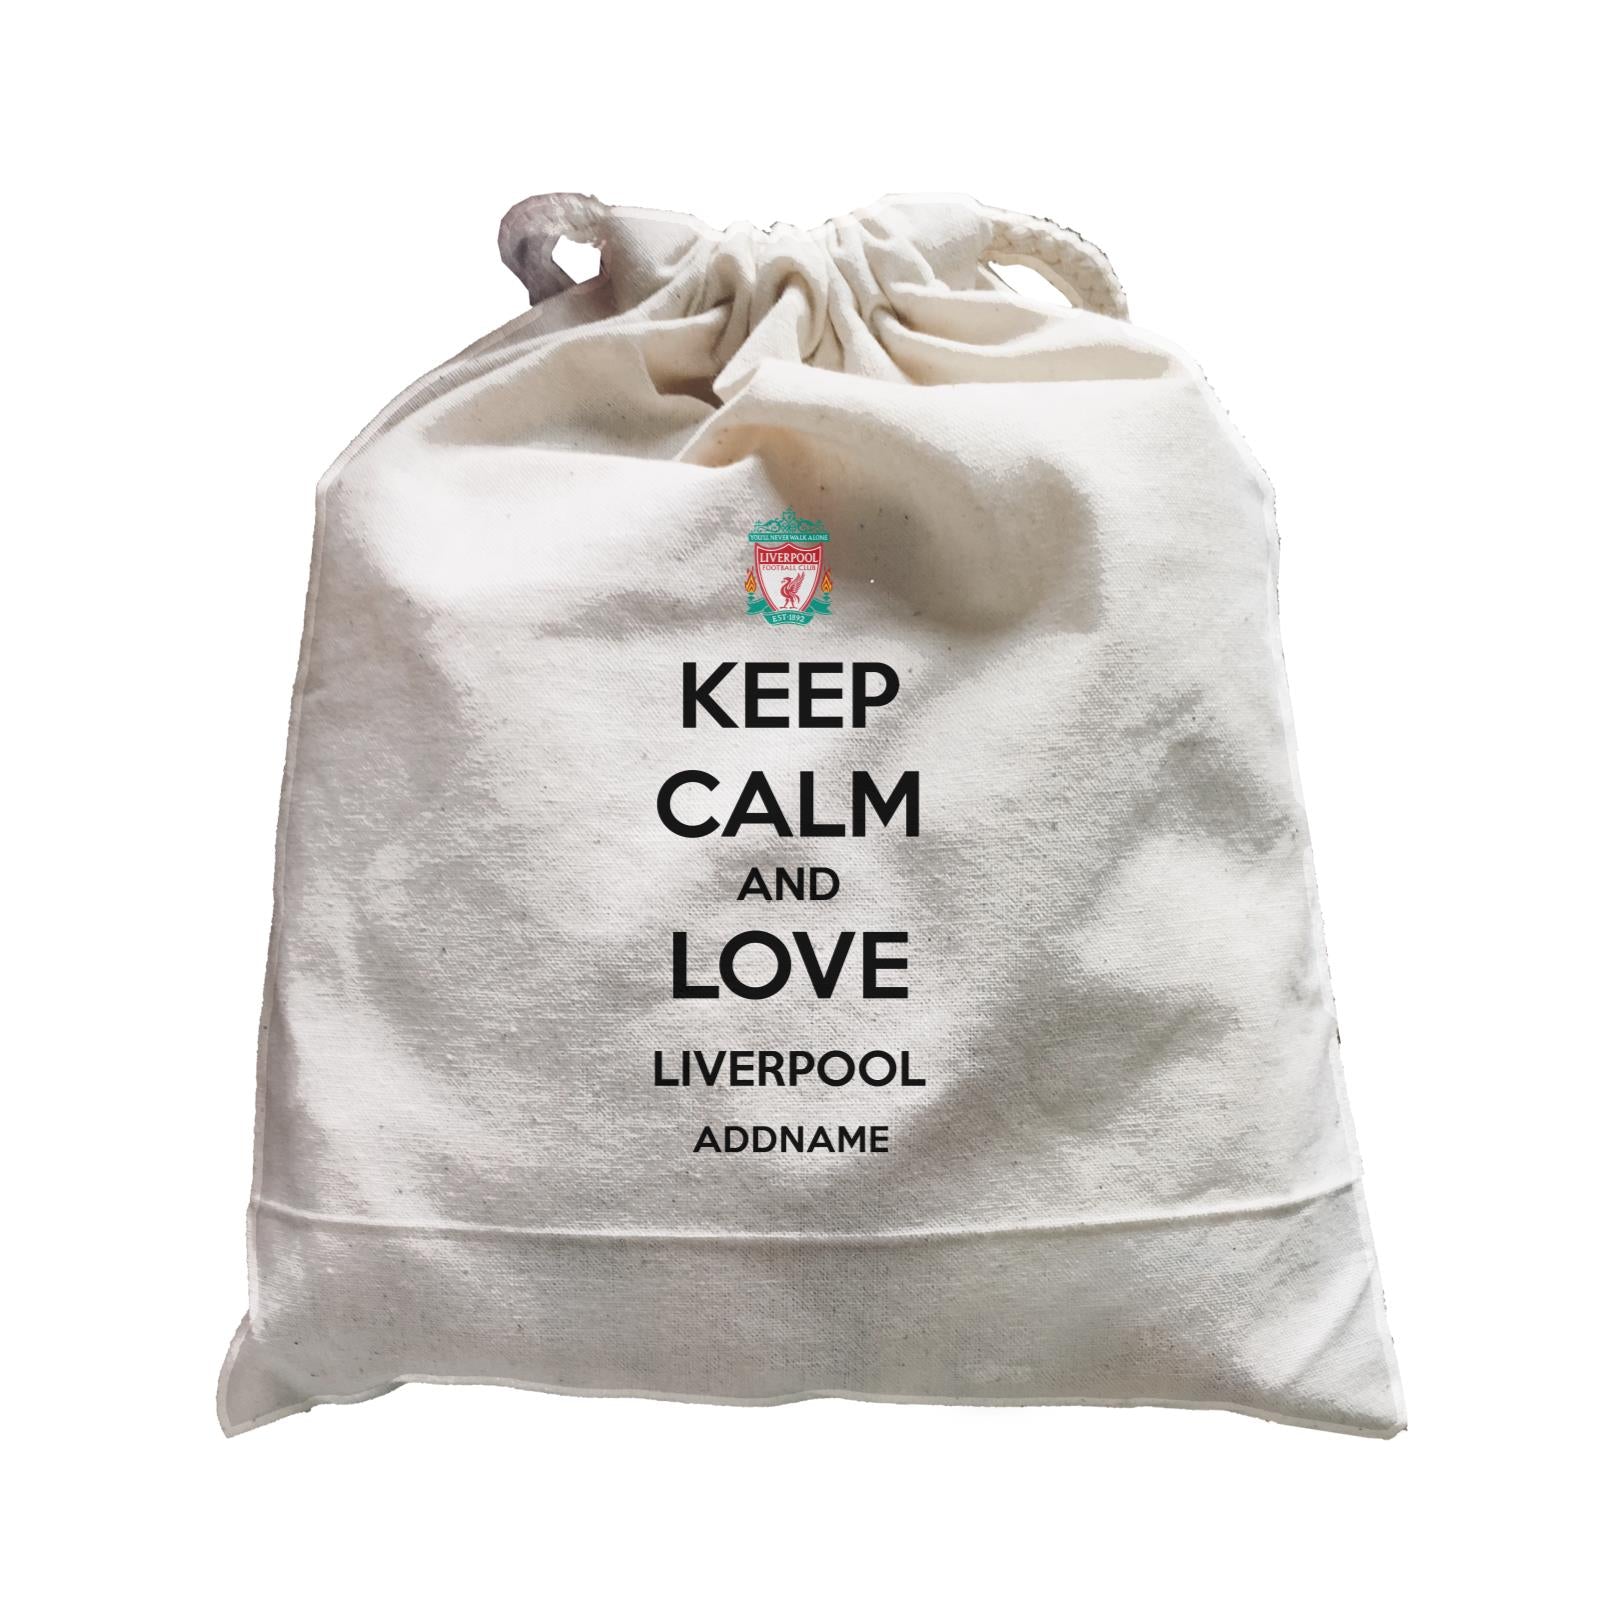 Liverpool Football Keep Calm And Love Serires Addname Satchel